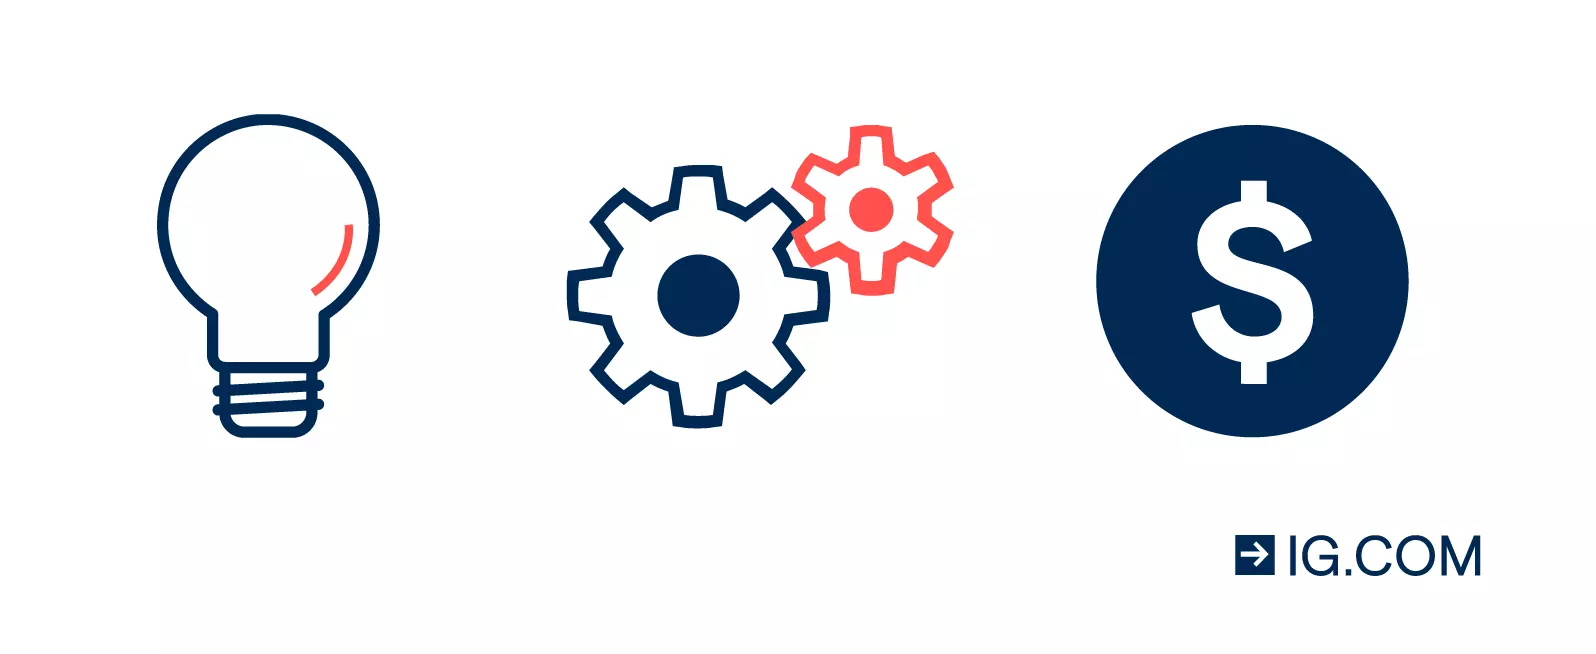 Image of three icons next to each other. The first is a lightbulb, the second, two interlocking cogs and the third is the dollar currency symbol.